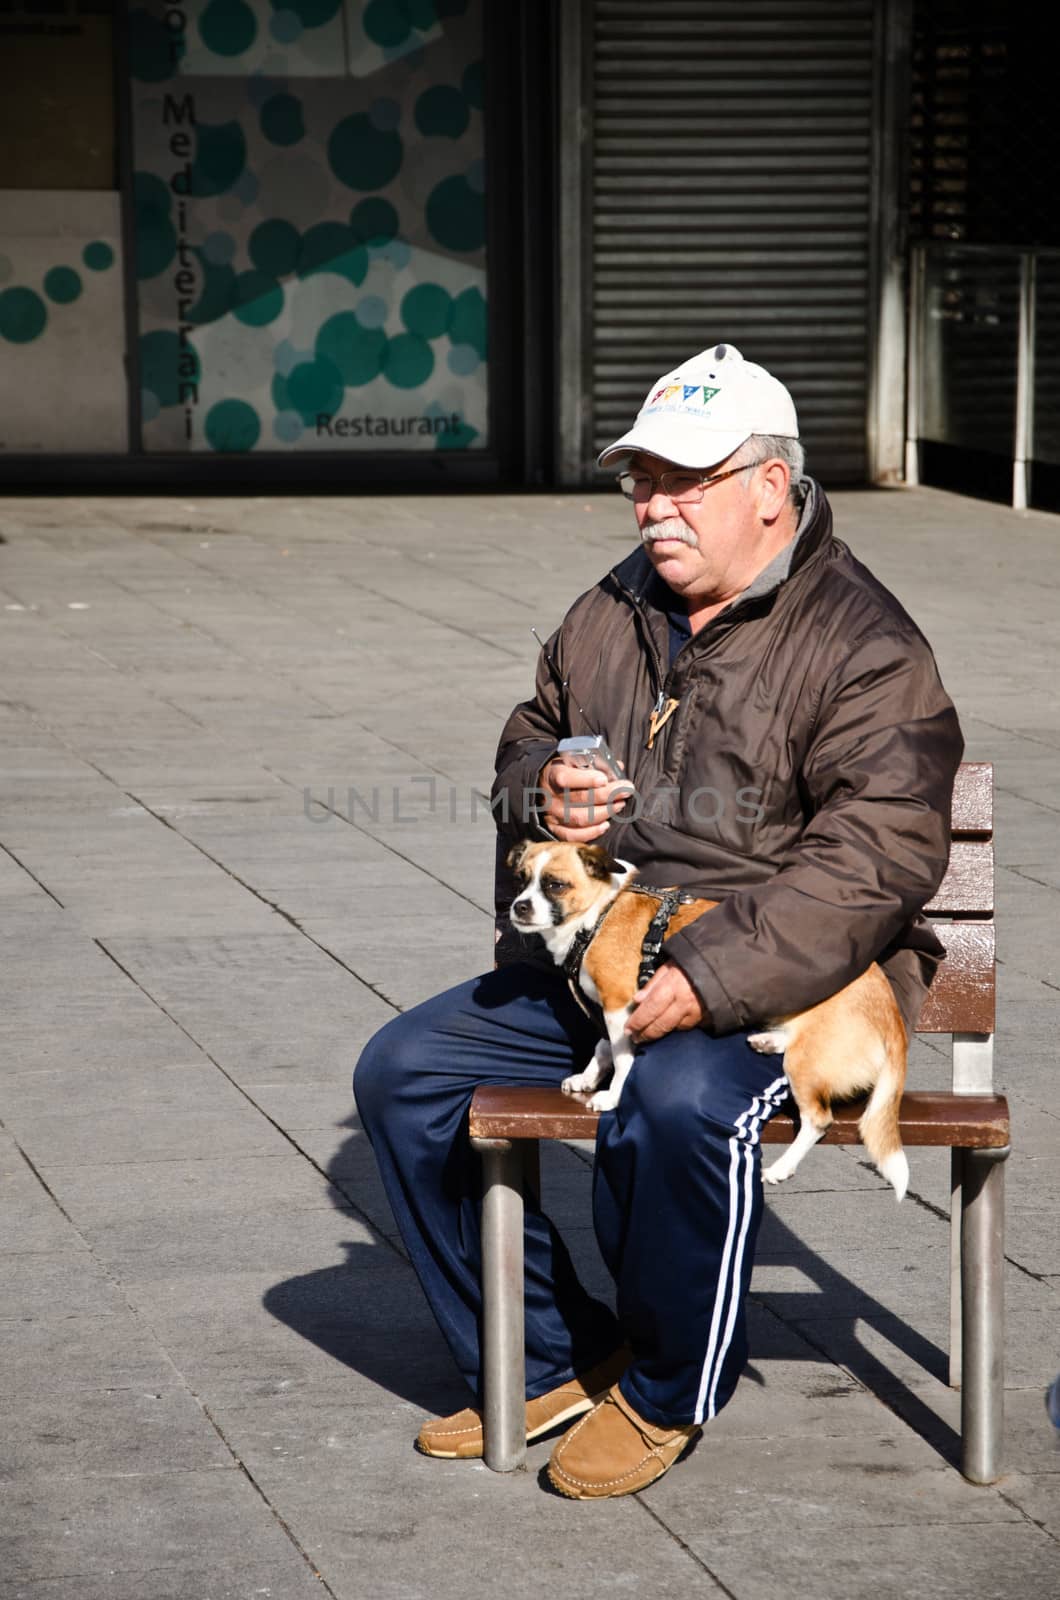 Seated man with dog.
